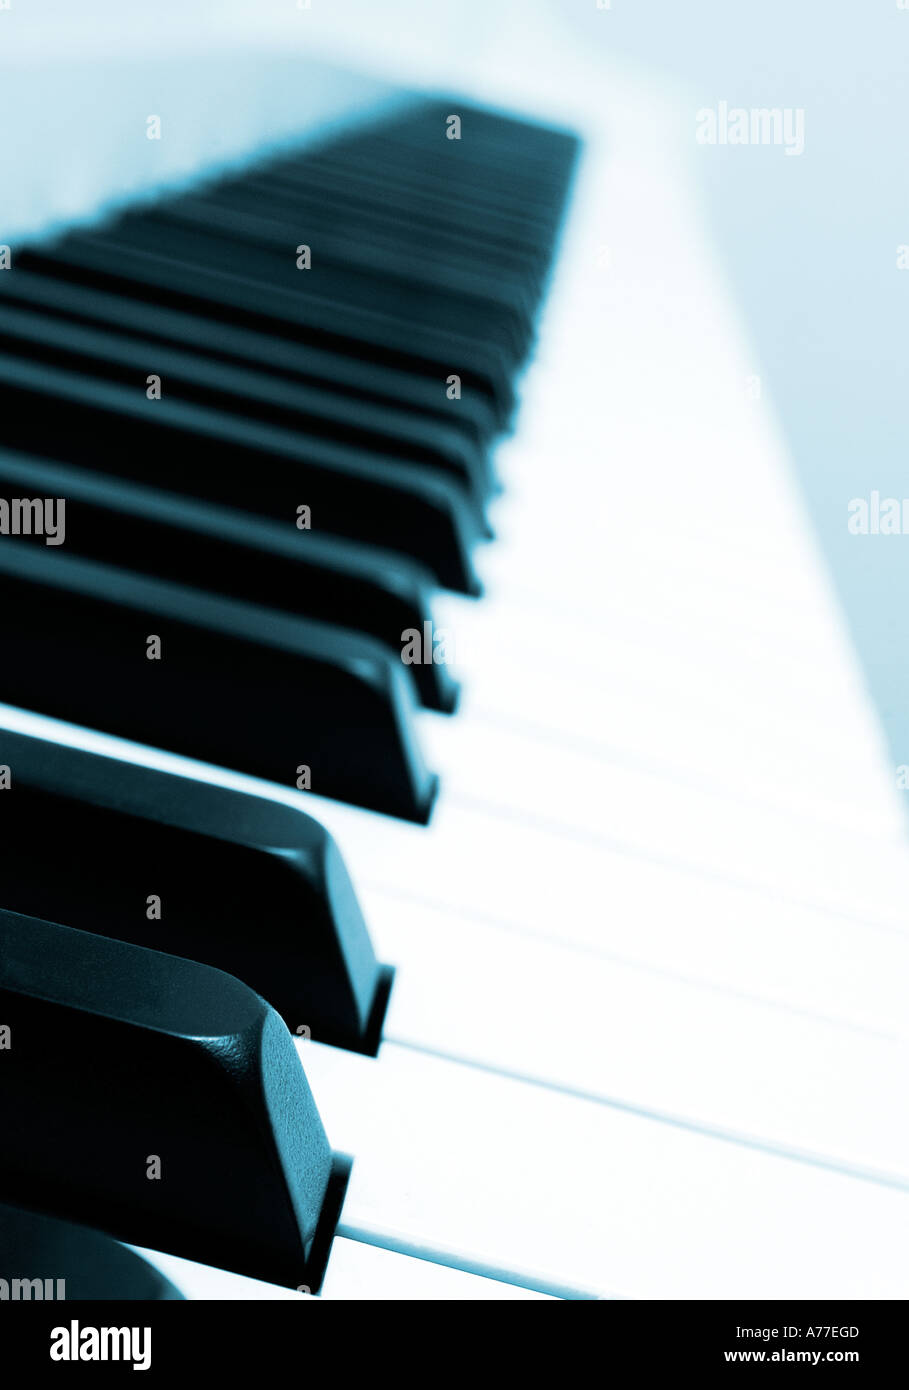 Piano keys. Picture by Patrick Steel patricksteel Stock Photo